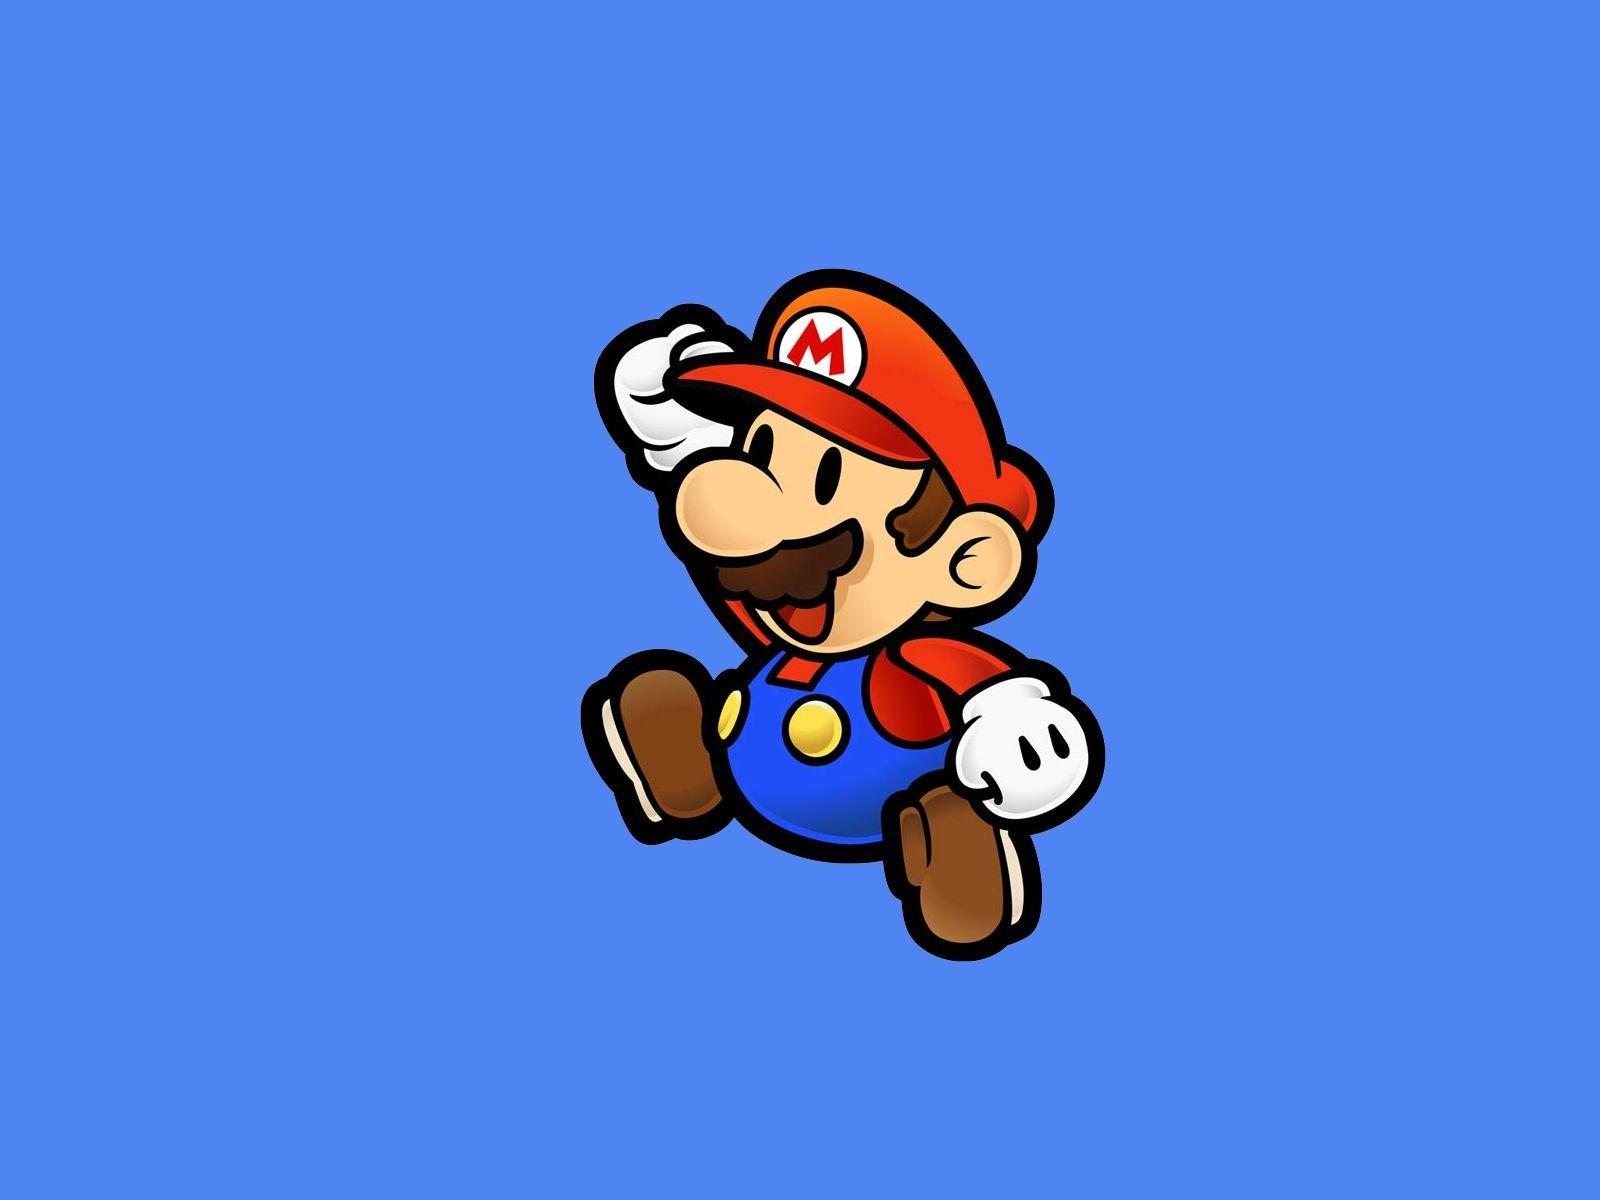 Mario Wallpaper Cartoons Anime Animated Wallpaper in jpg format for free download